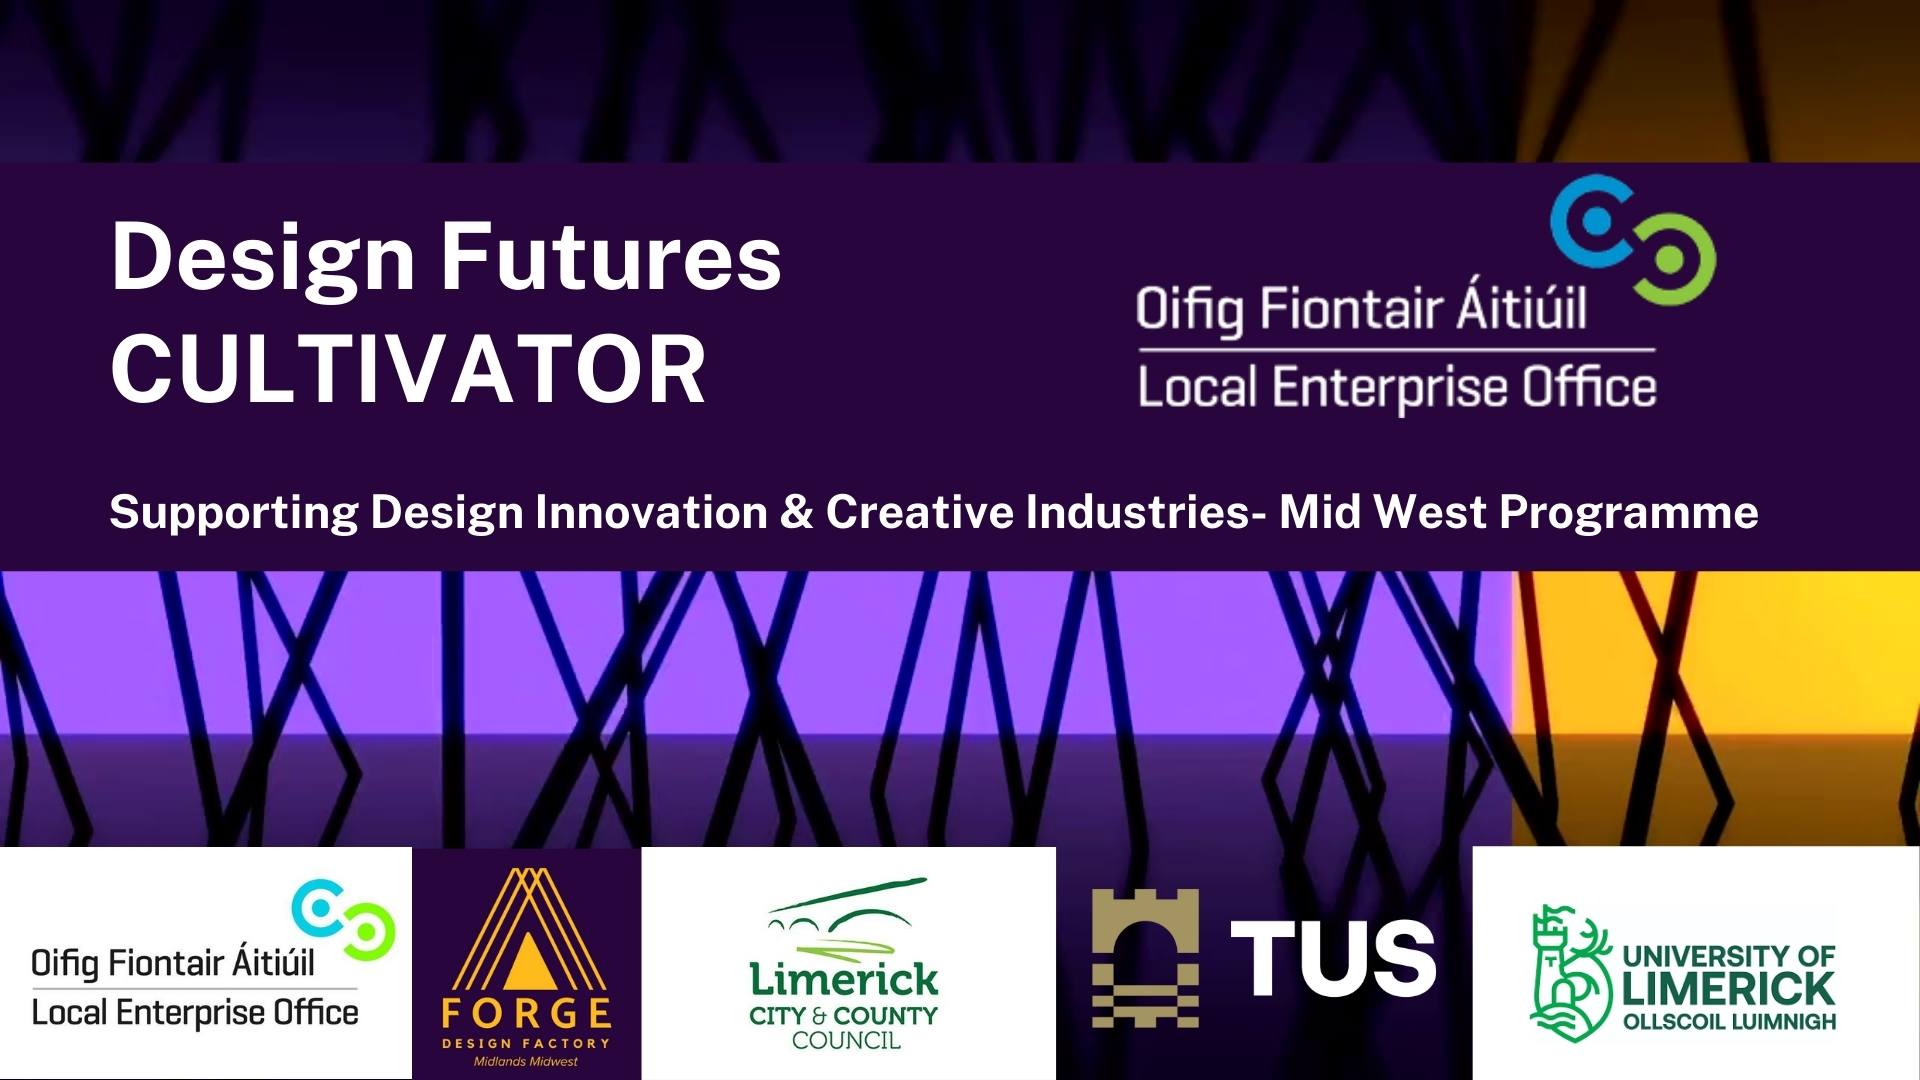 FORGE Design Factory Launches Design Futures CULTIVATOR programme